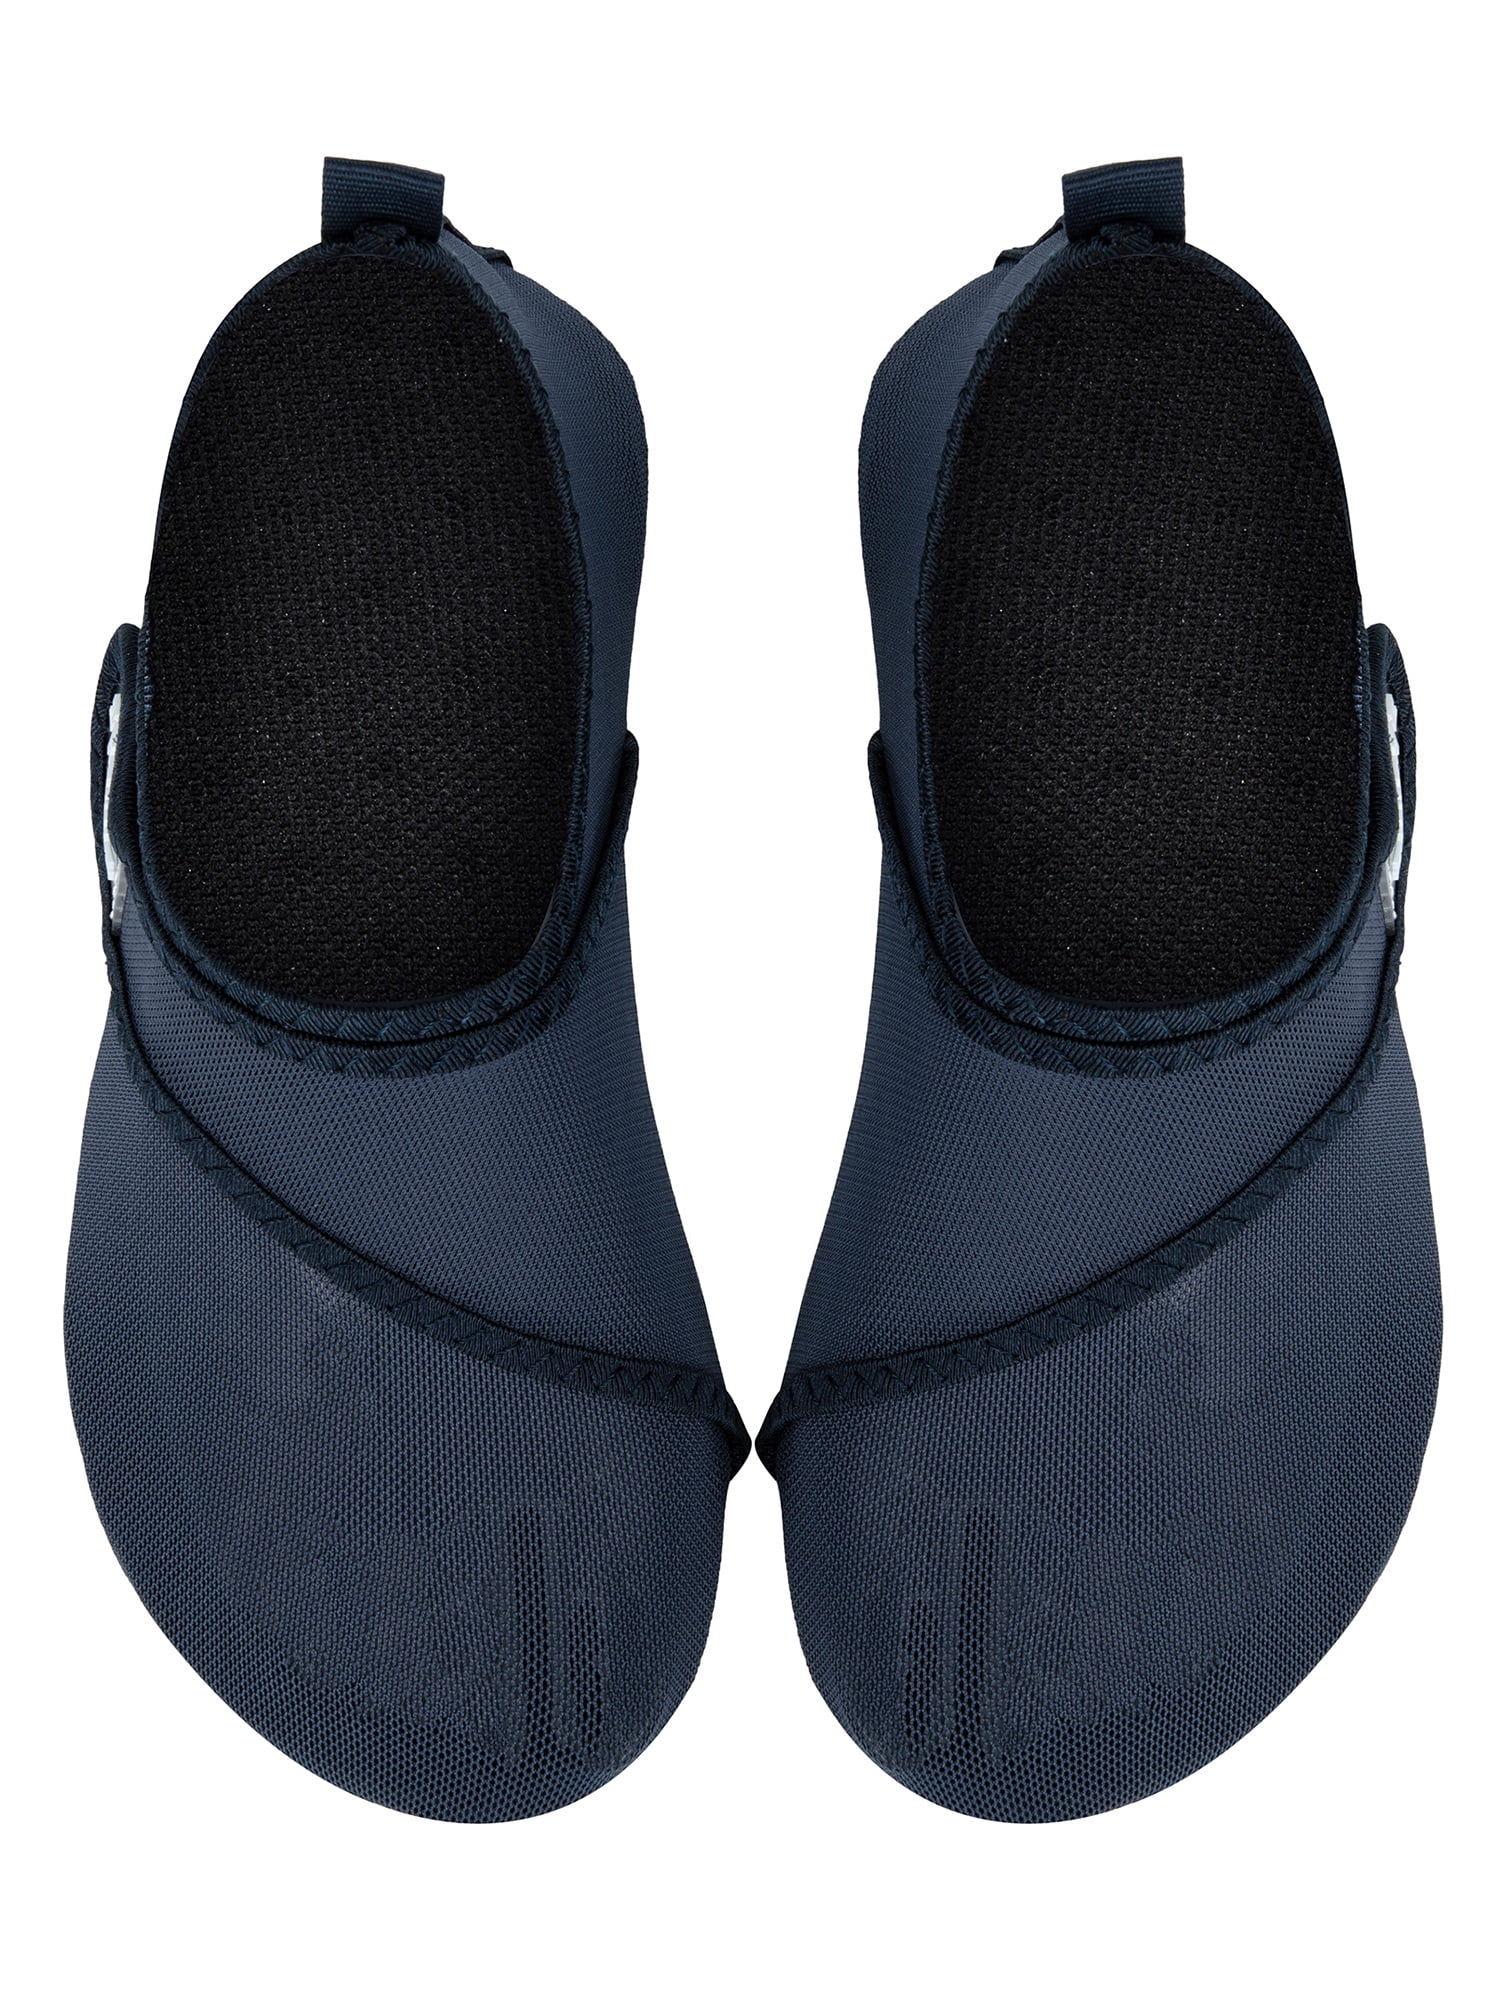 surf water shoes